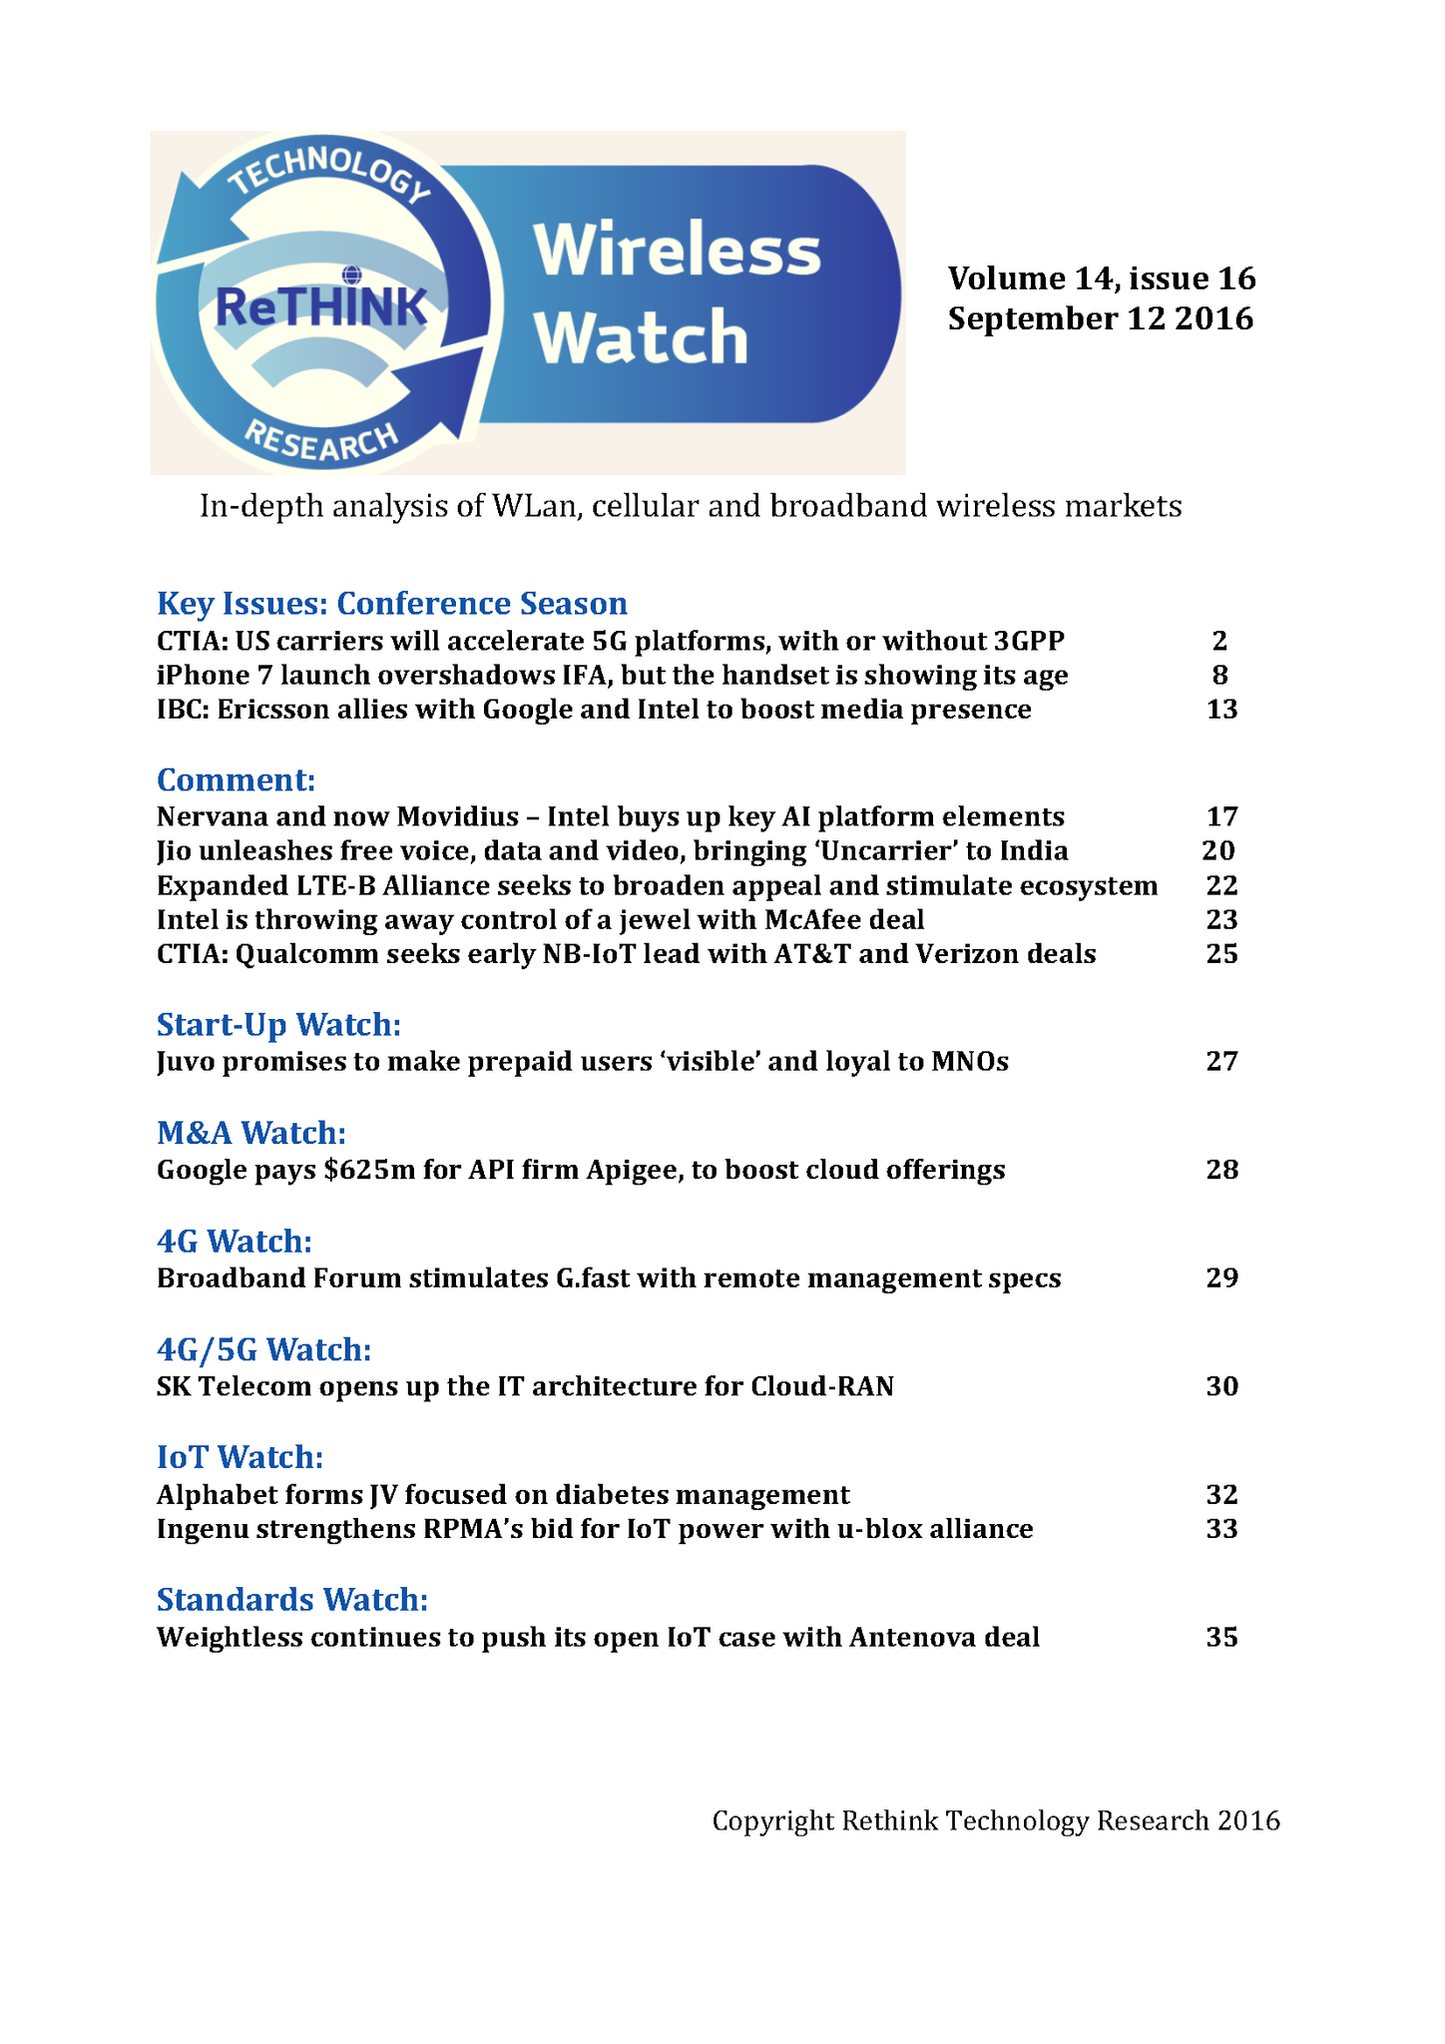 Wireless Watch 653 September 12: News from IBC and CTIA